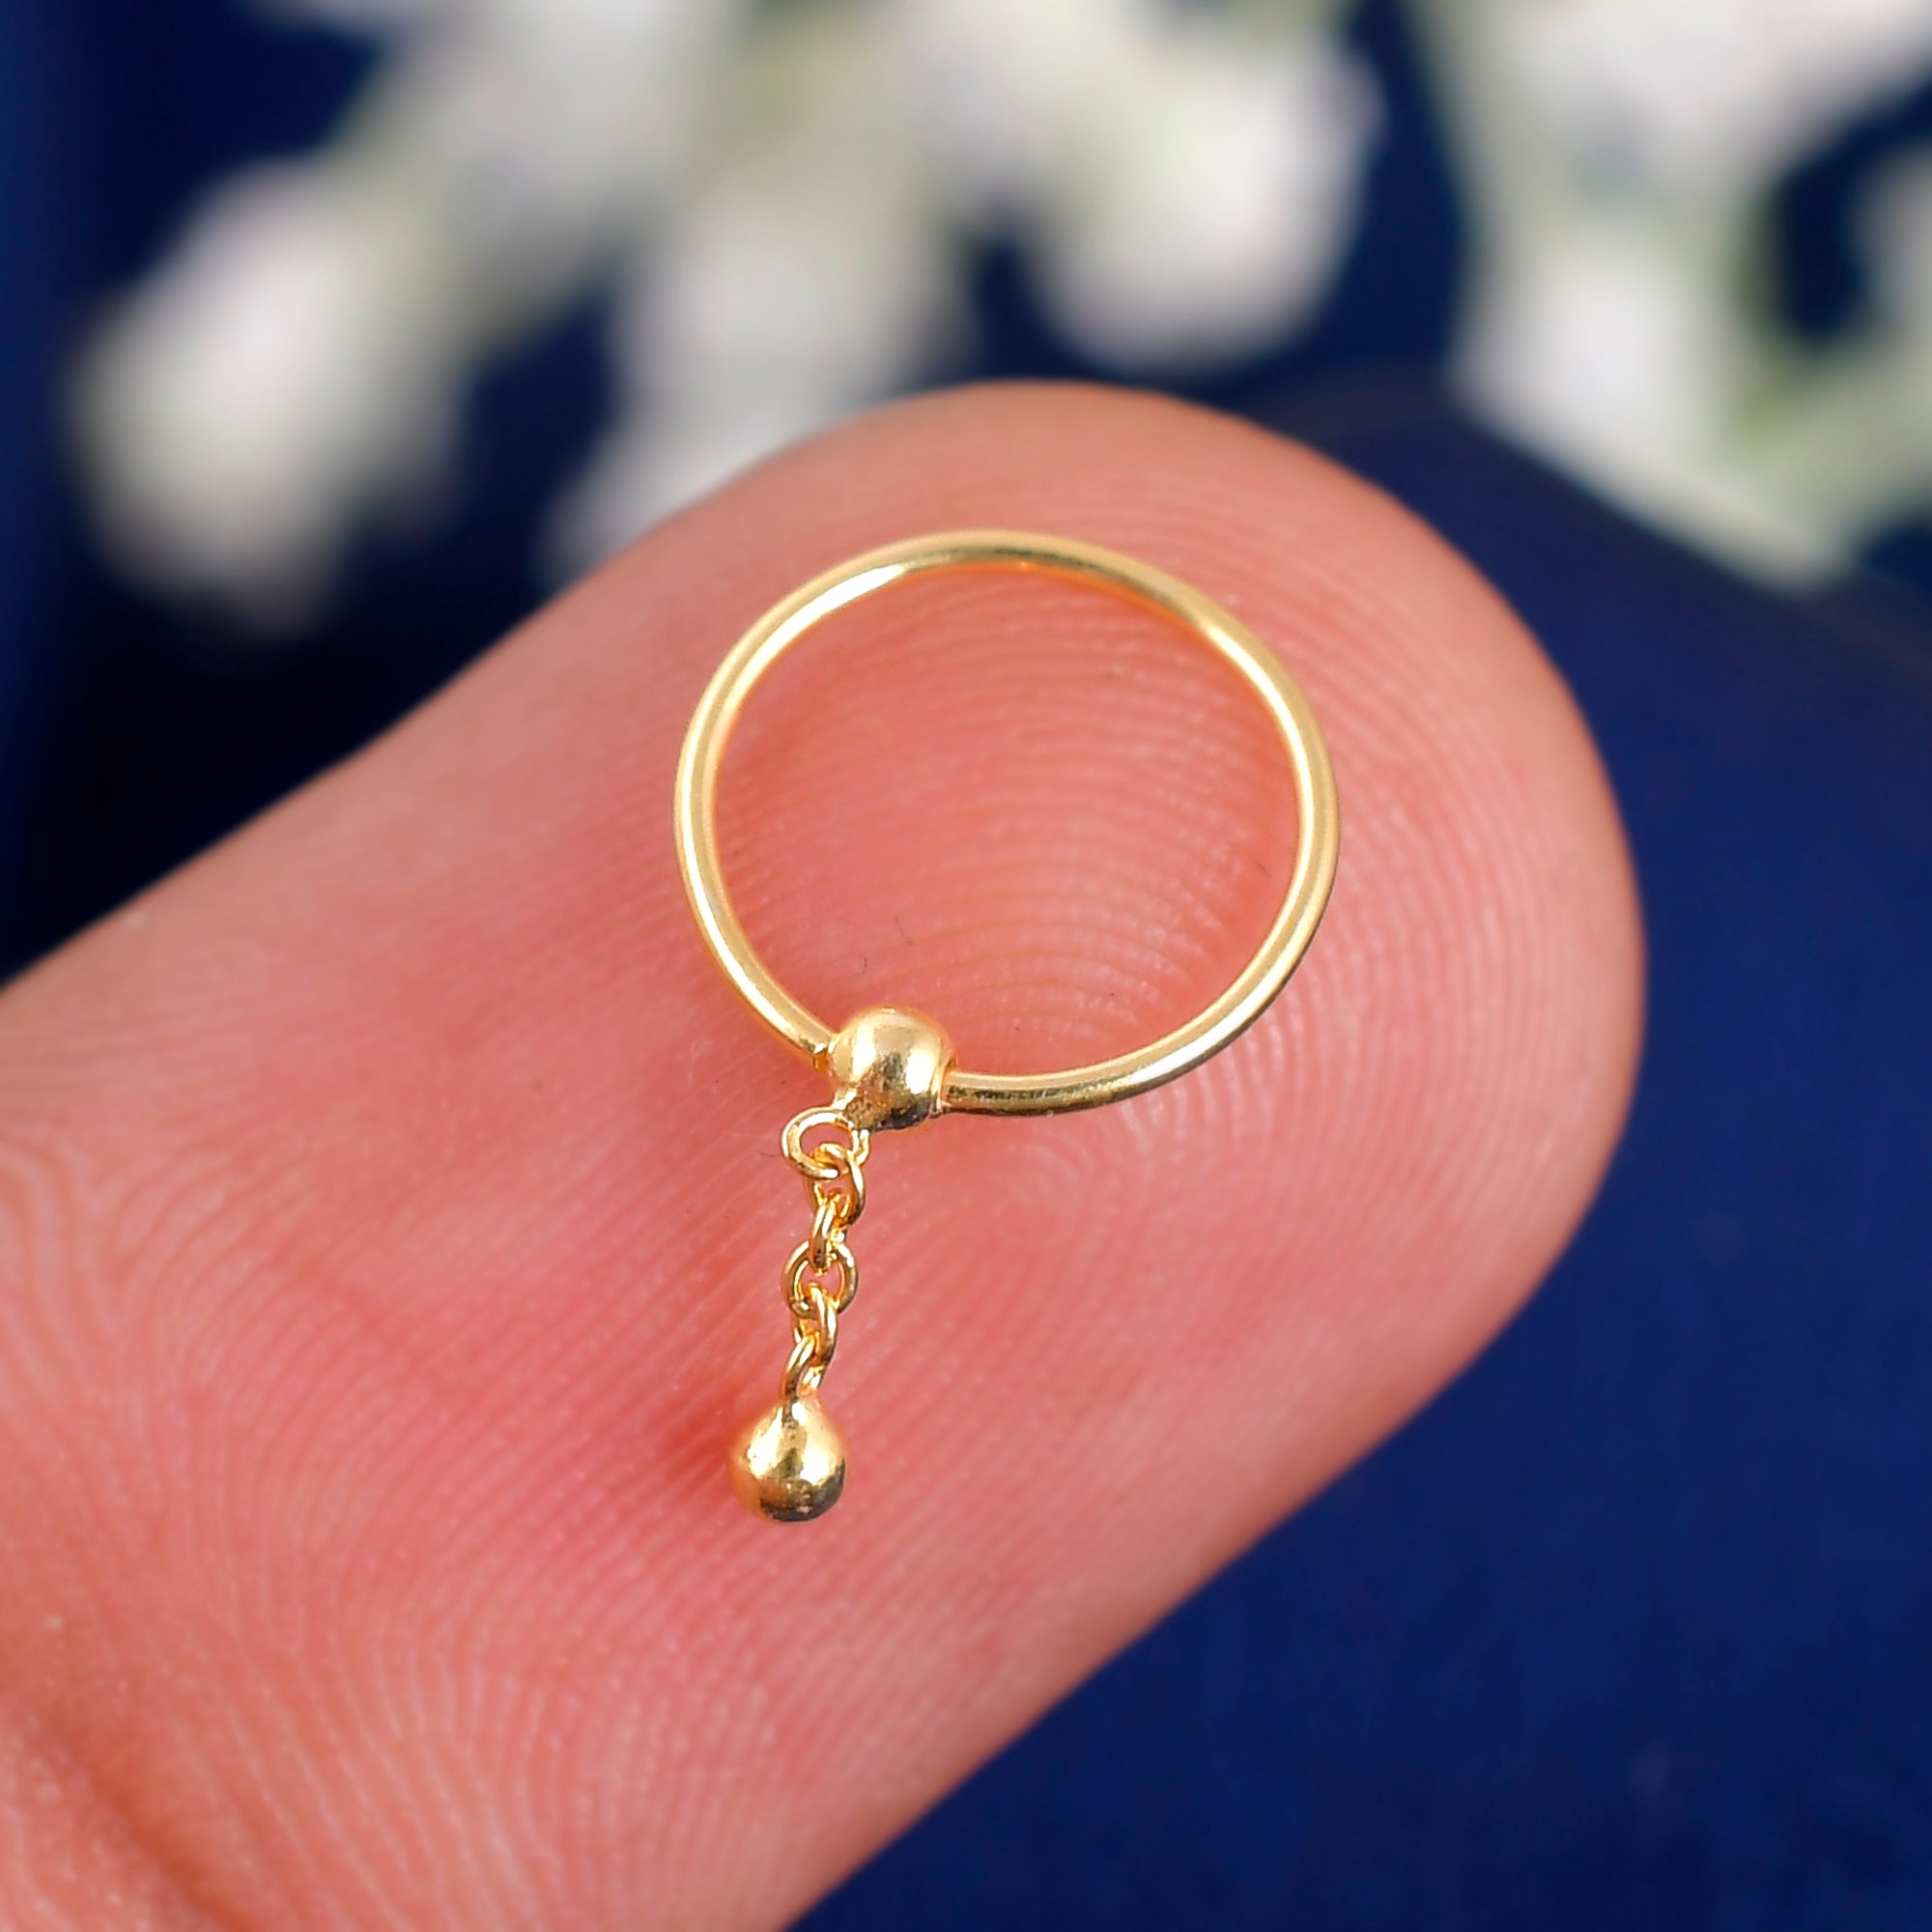 9 Traditional Models of Gold Nose Rings for Trending Look in 2023